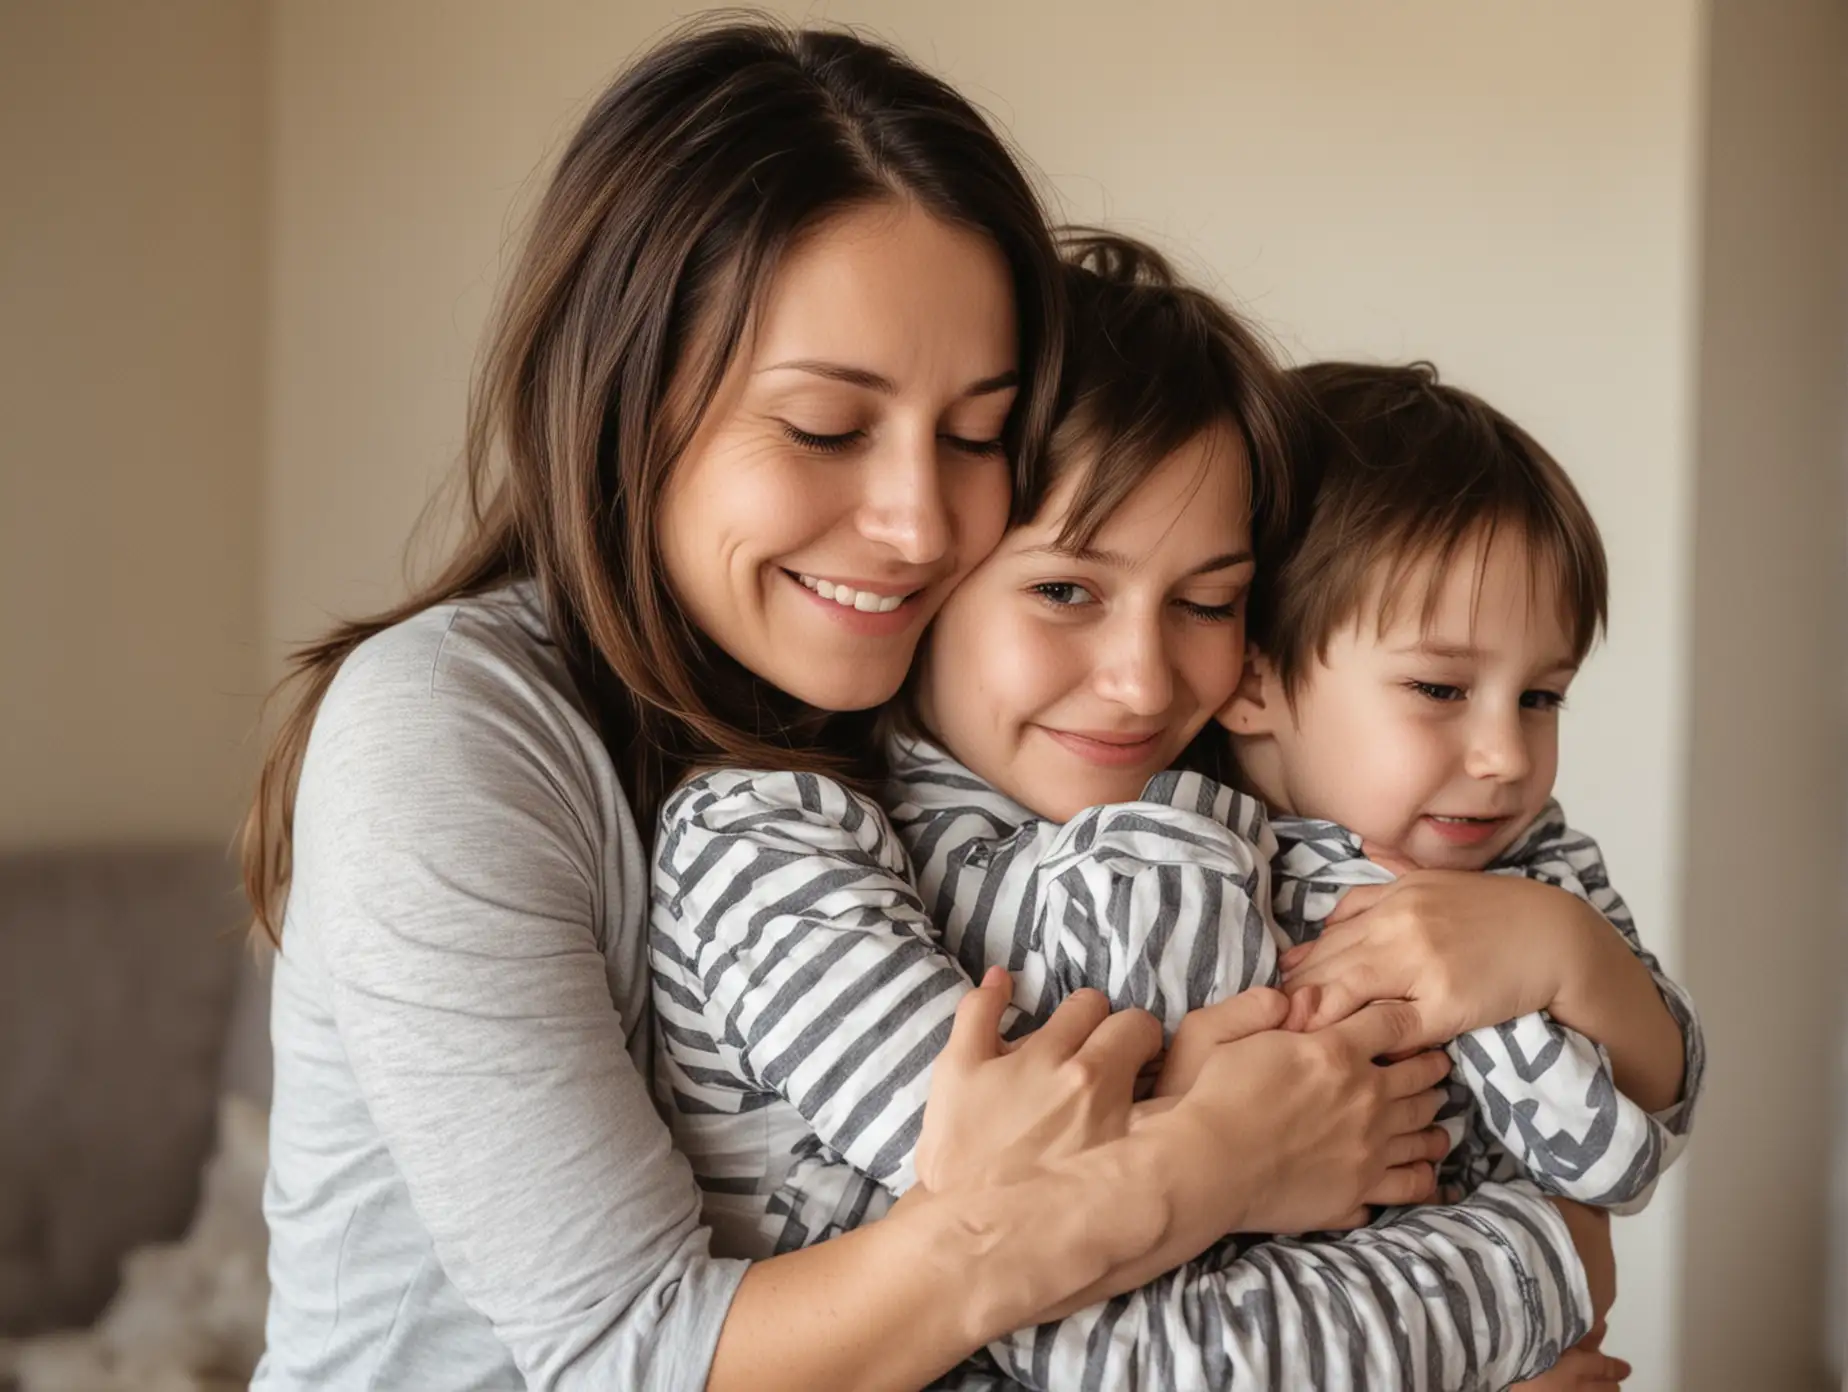 Mother Embracing Two Children in Warm Family Moment